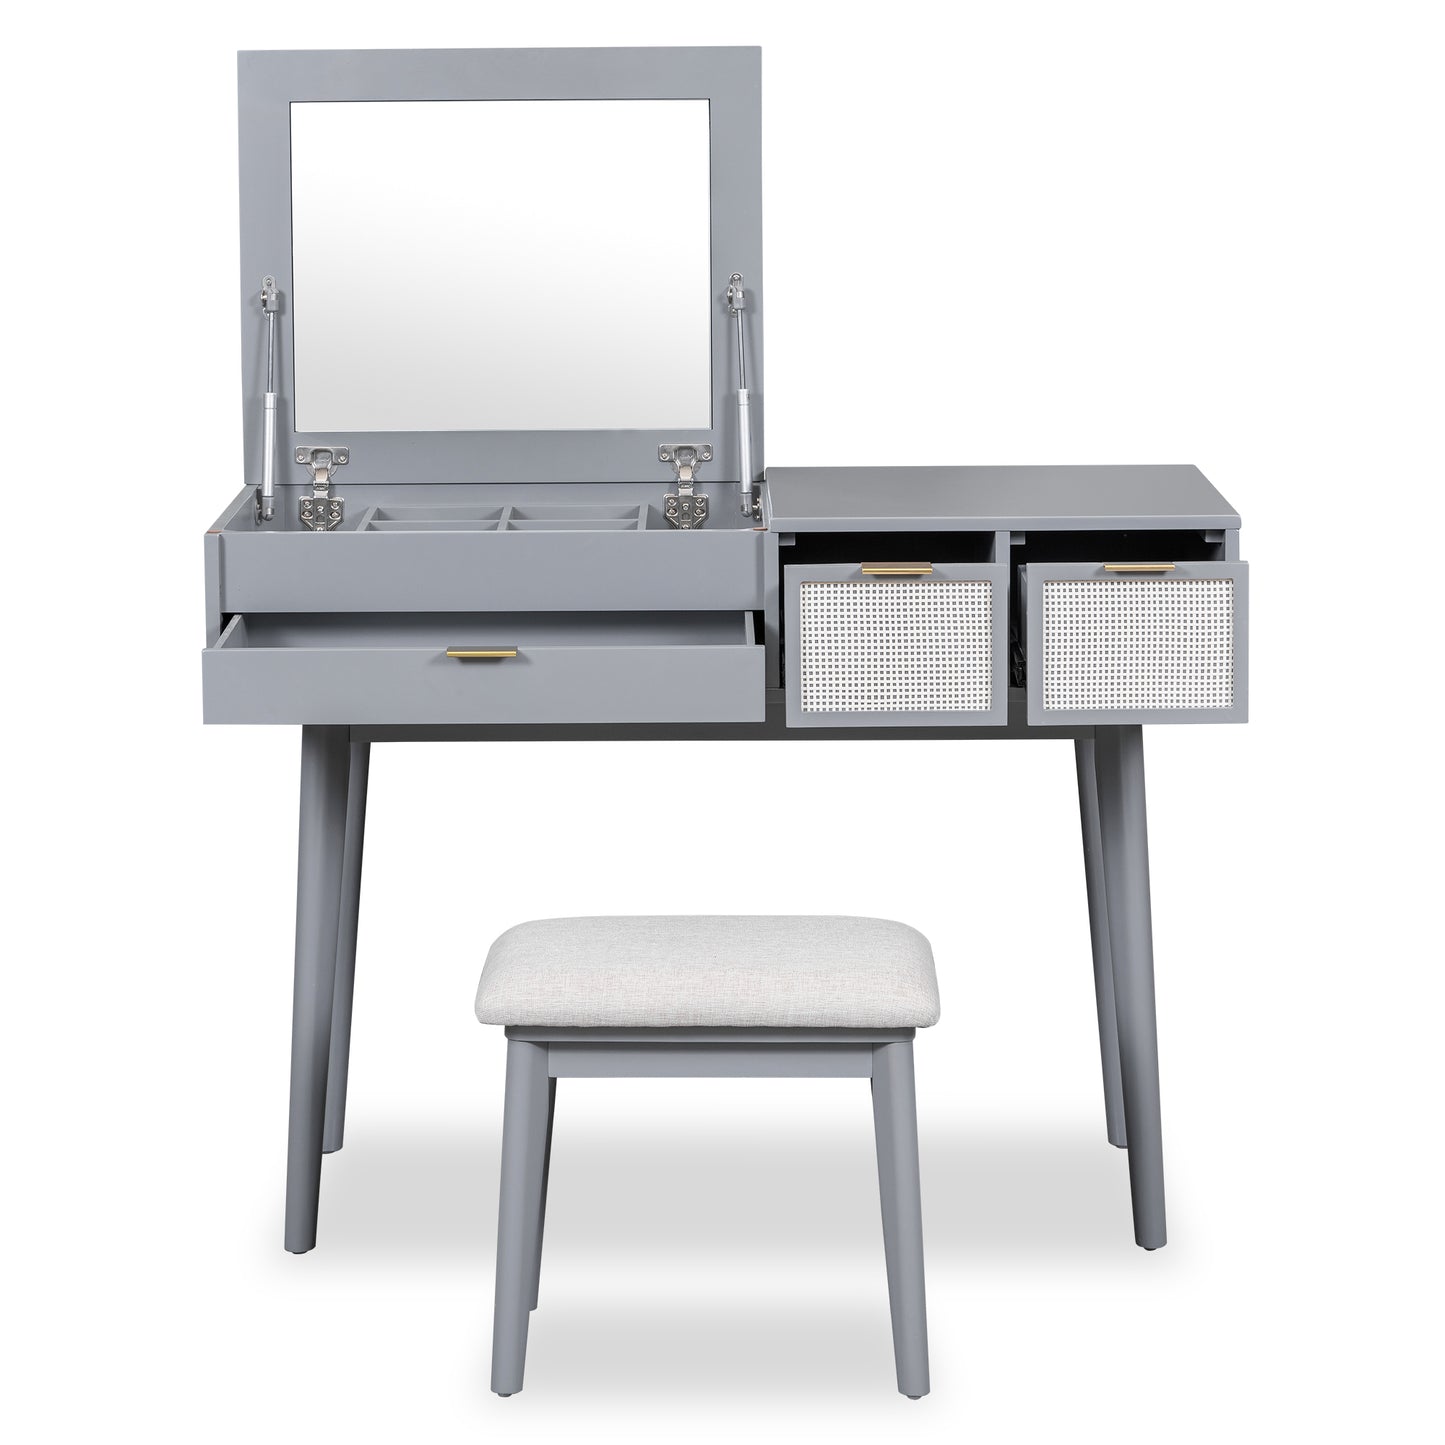 43.3" Classic Wood Makeup Vanity Set with Flip-top Mirror and Stool, Dressing Table with Three Drawers and storage space, Gray